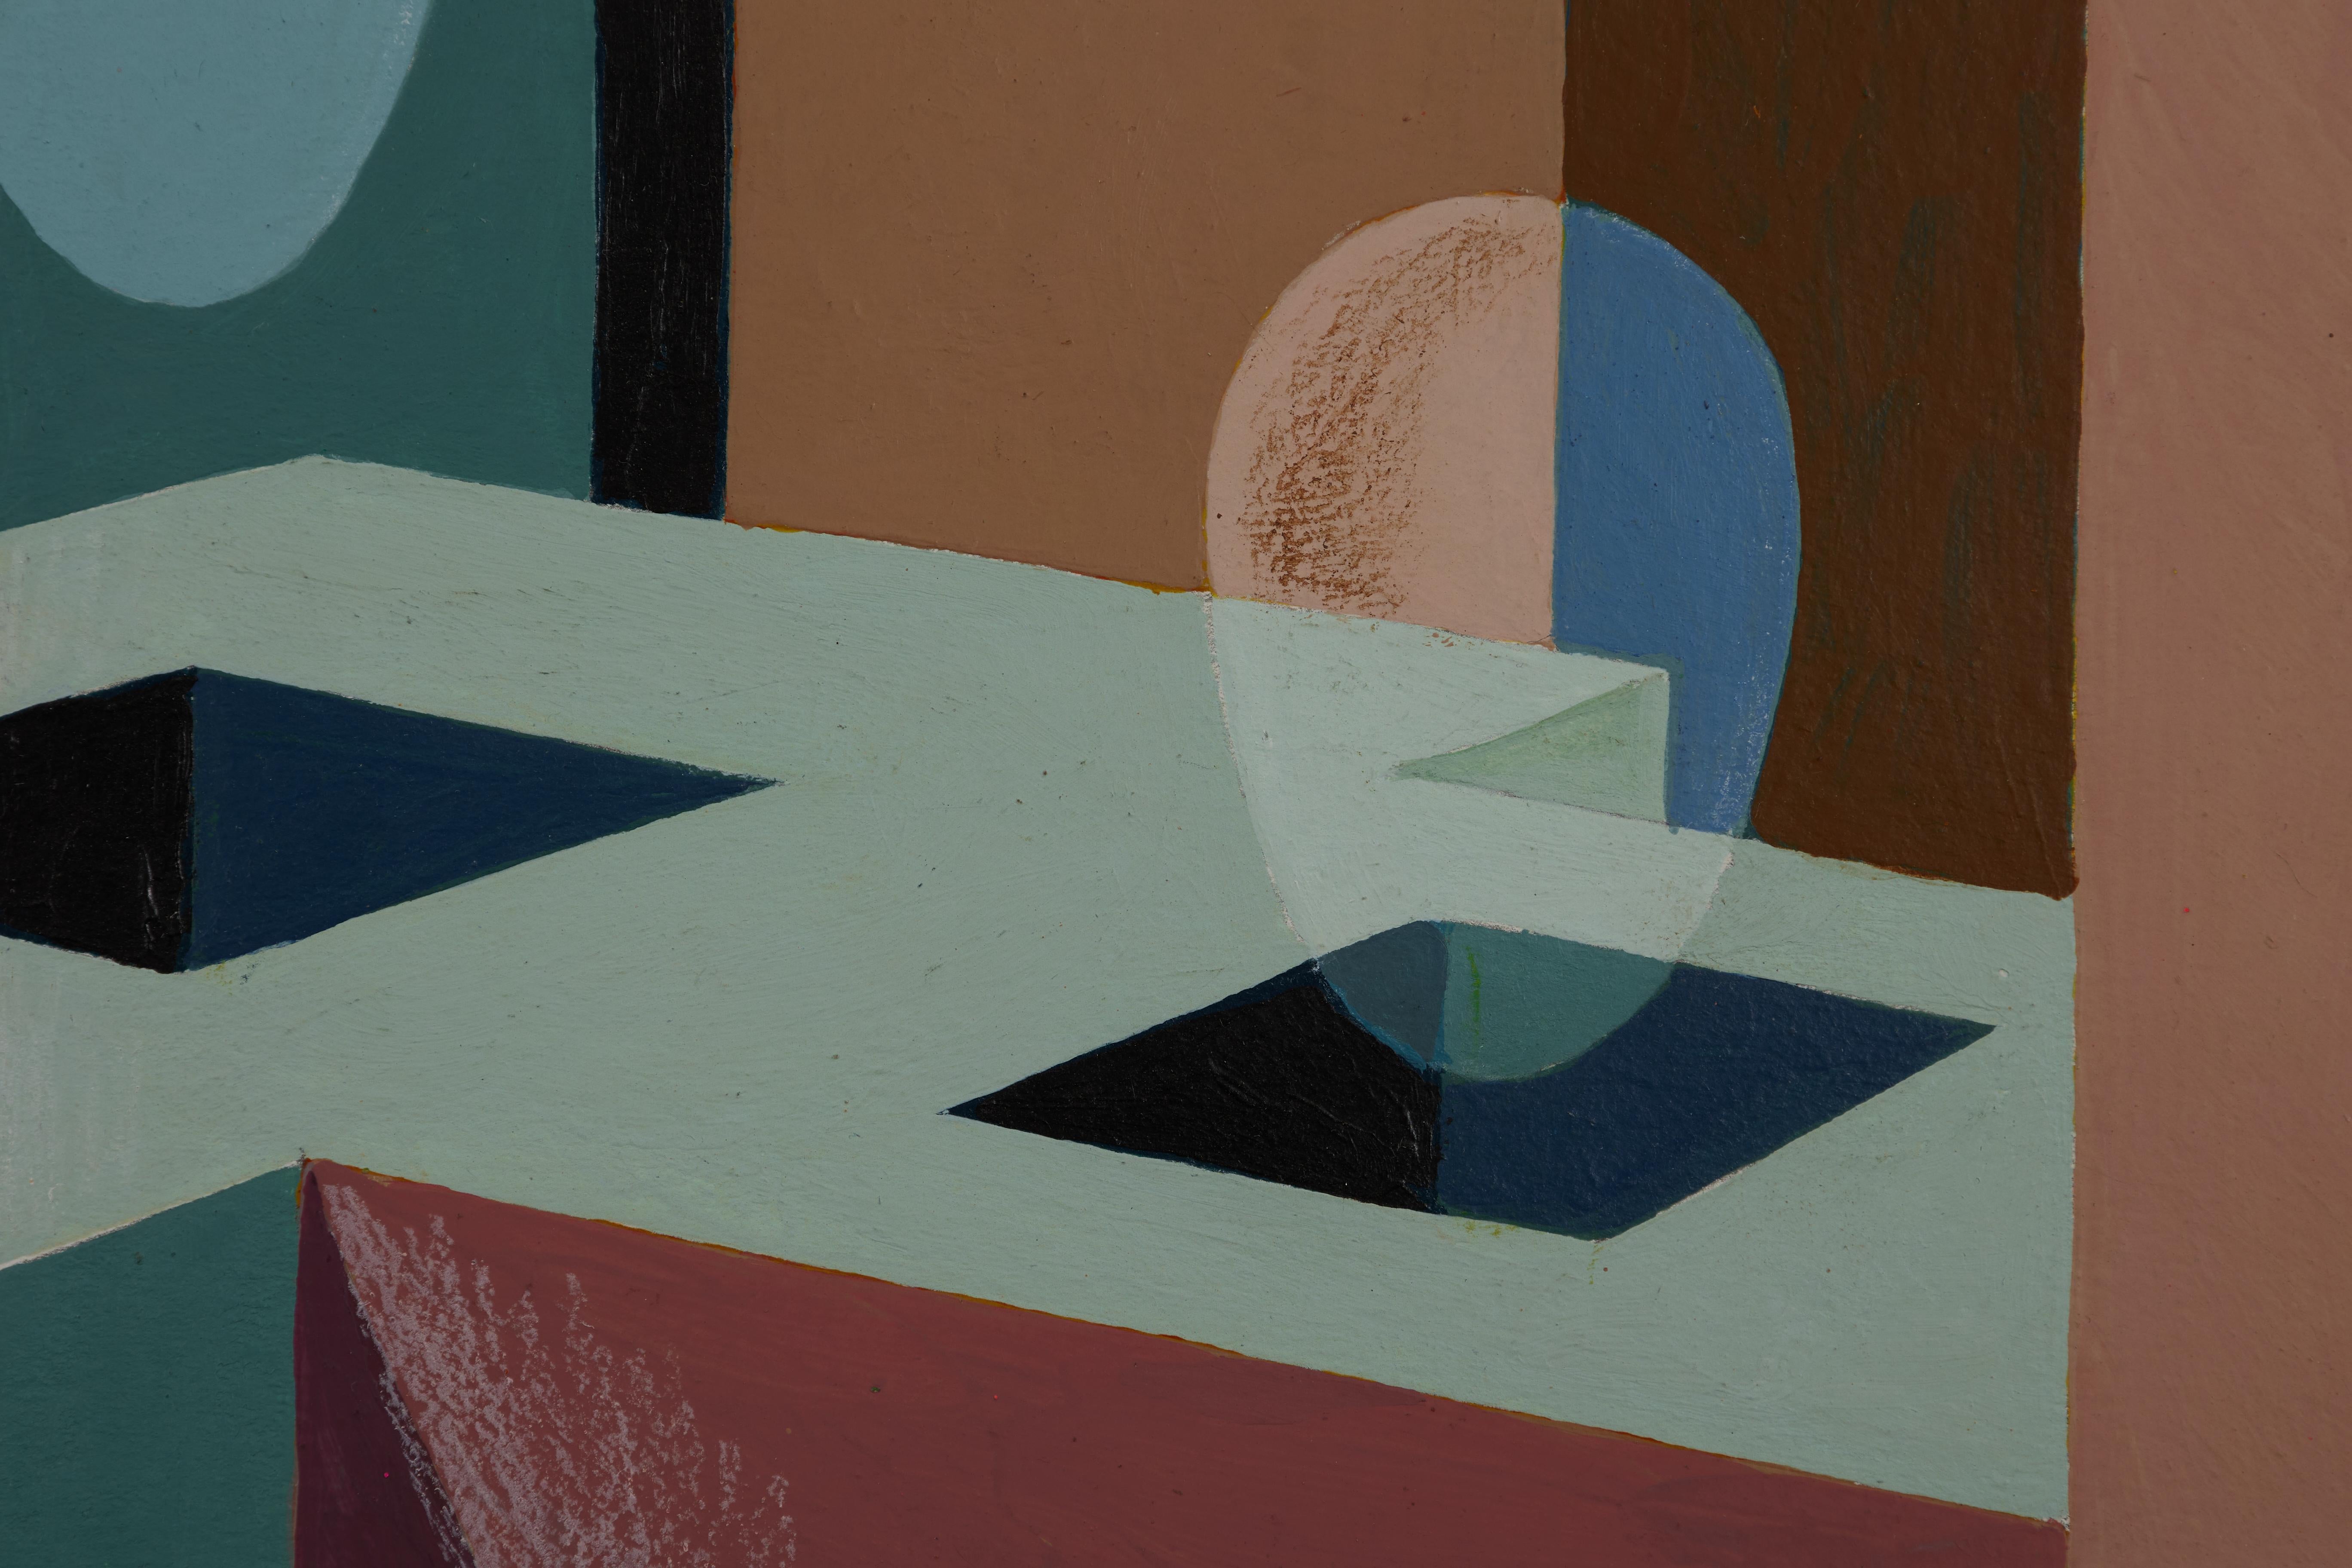 Clarence Holbrook Carter (American, 1904-2000)
Transection with Architectural Forms, c. 1980s
Acrylic and graphite on board
12 x 20 inches

A surrealist mid-century figural abstract painting. 

Clarence Holbrook Carter achieved a level of national